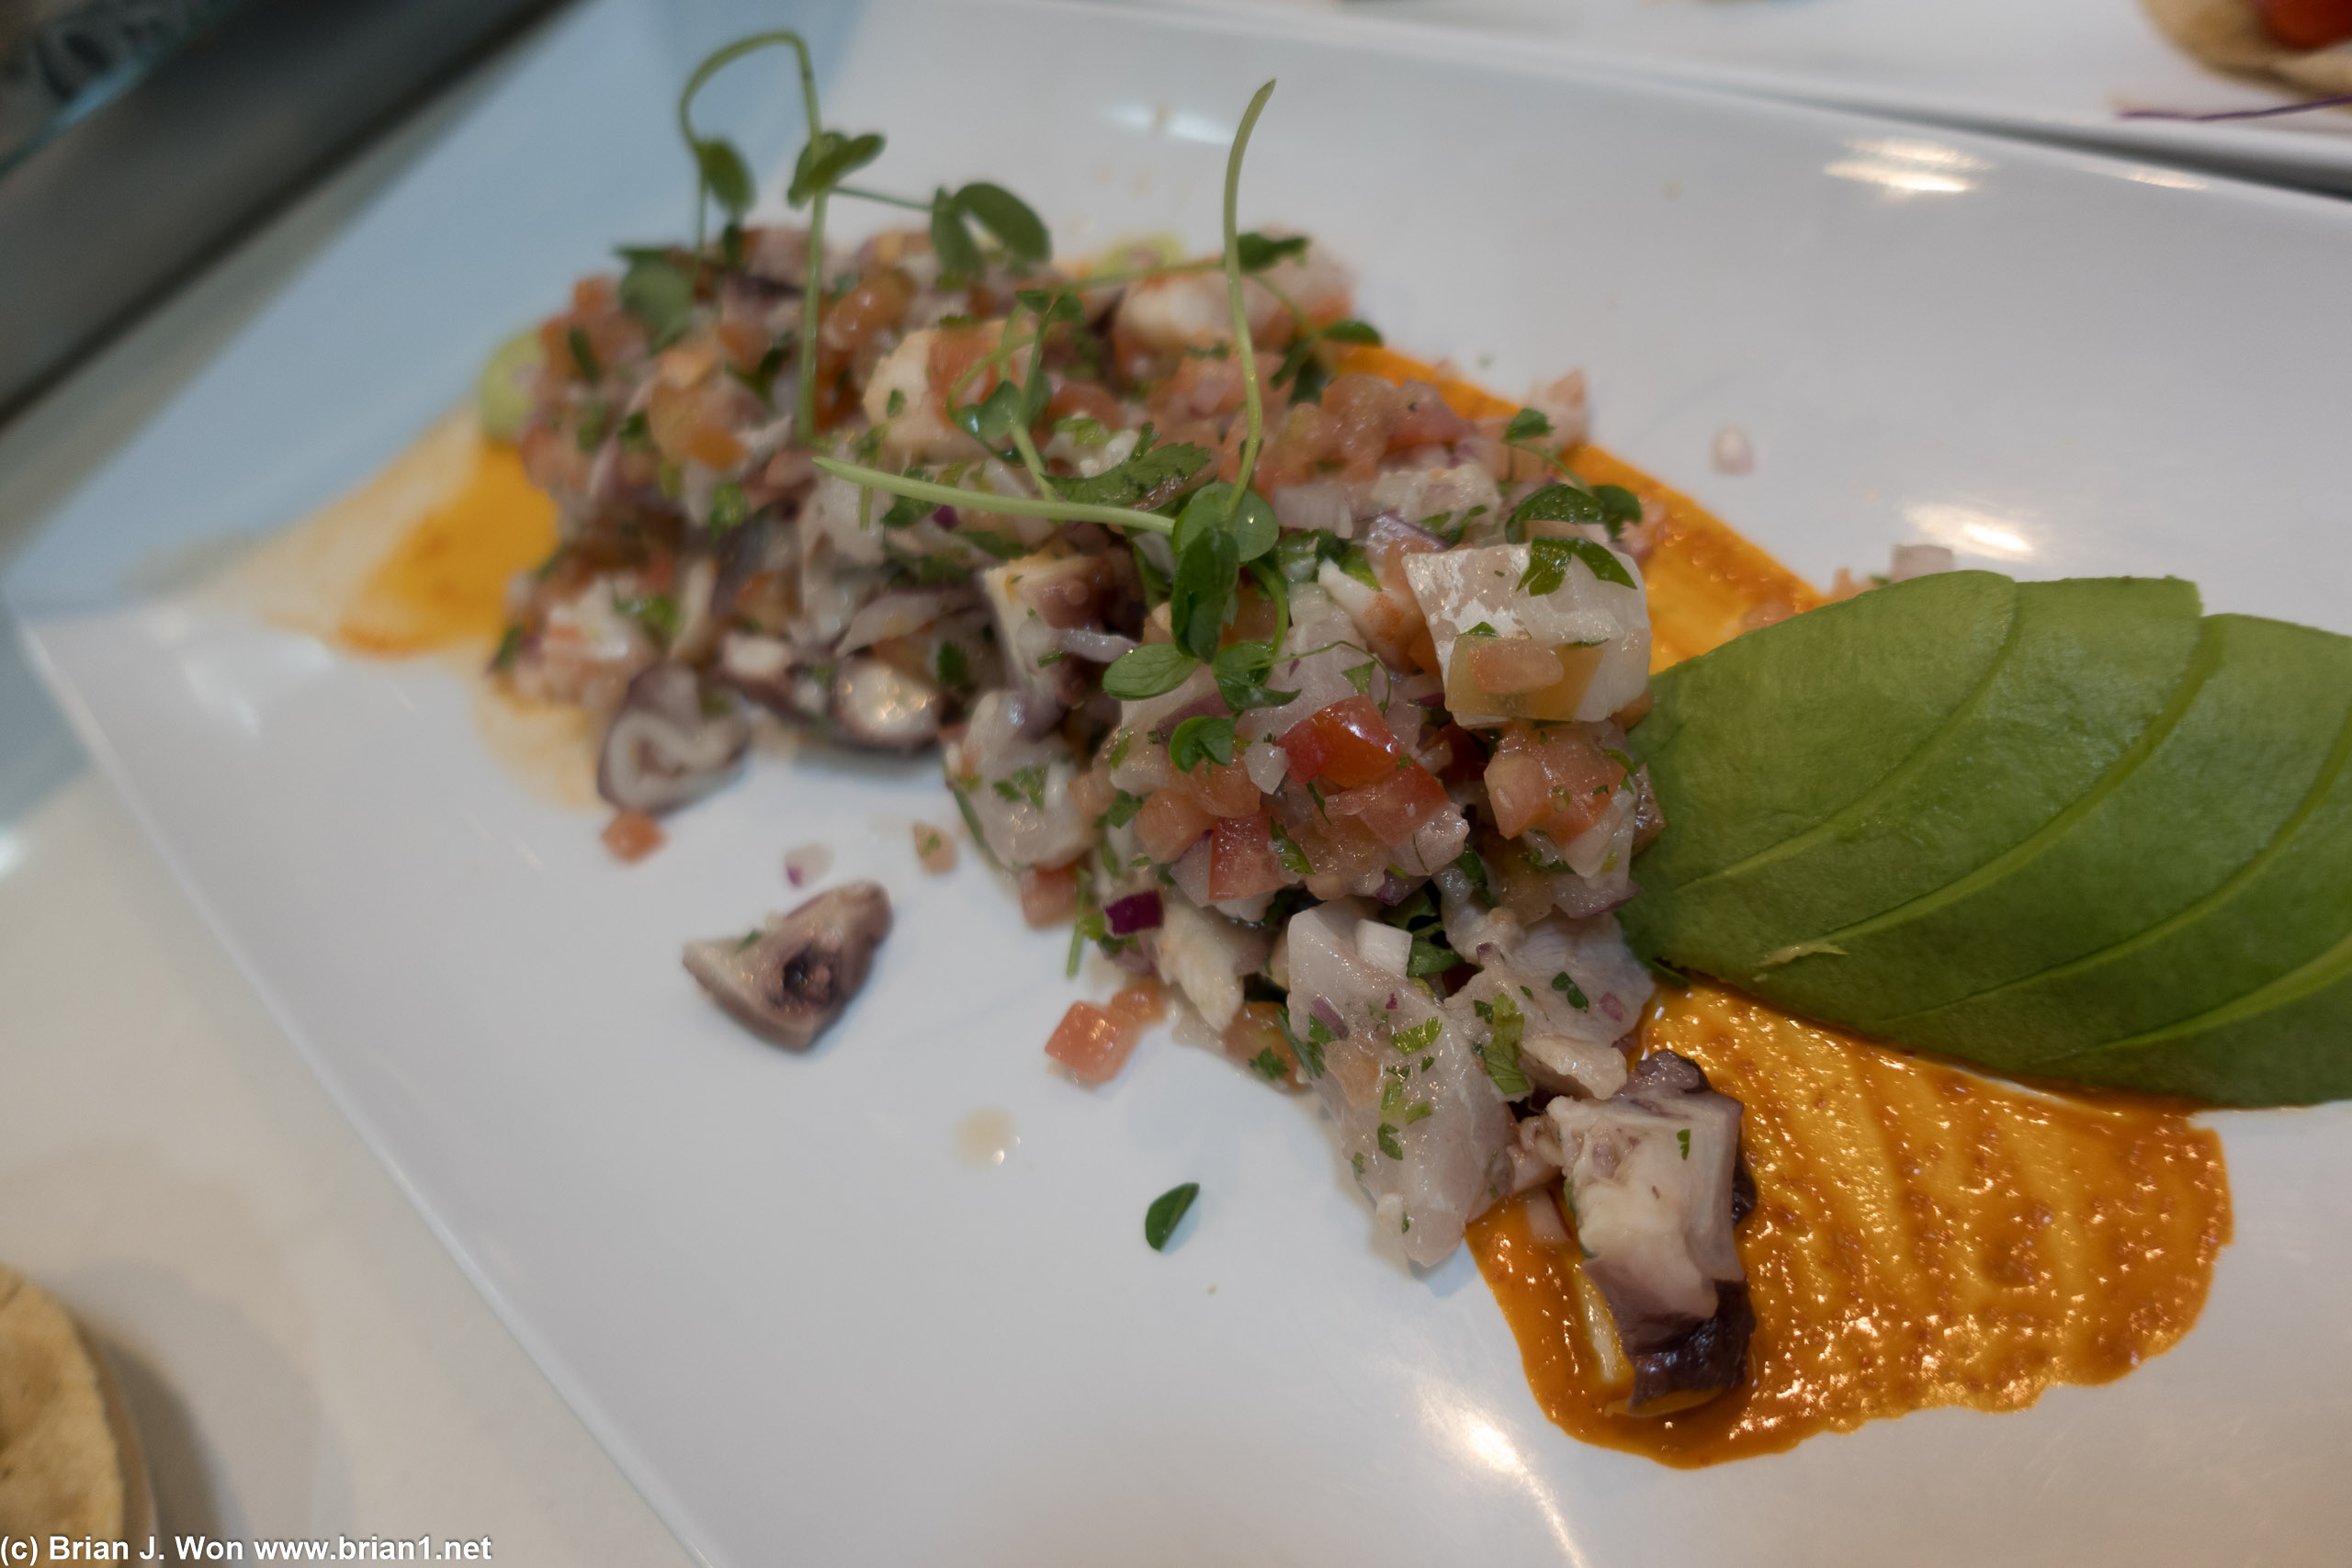 Ceviche was an ample portion.